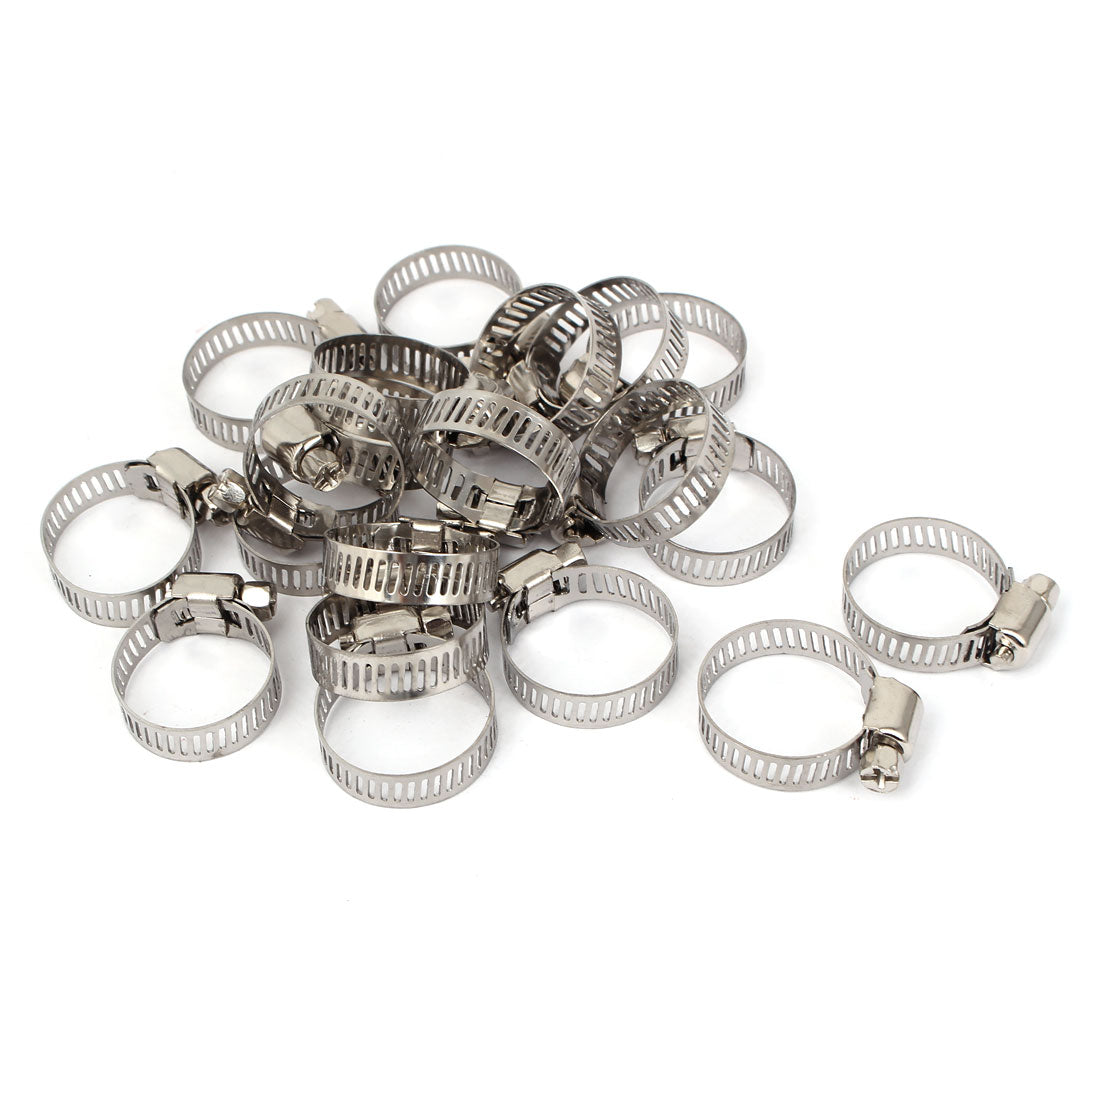 uxcell Uxcell 16-25mm Phillips Head Screws Stainless Steel Hose Clips Pipe Clamps 20 Pcs